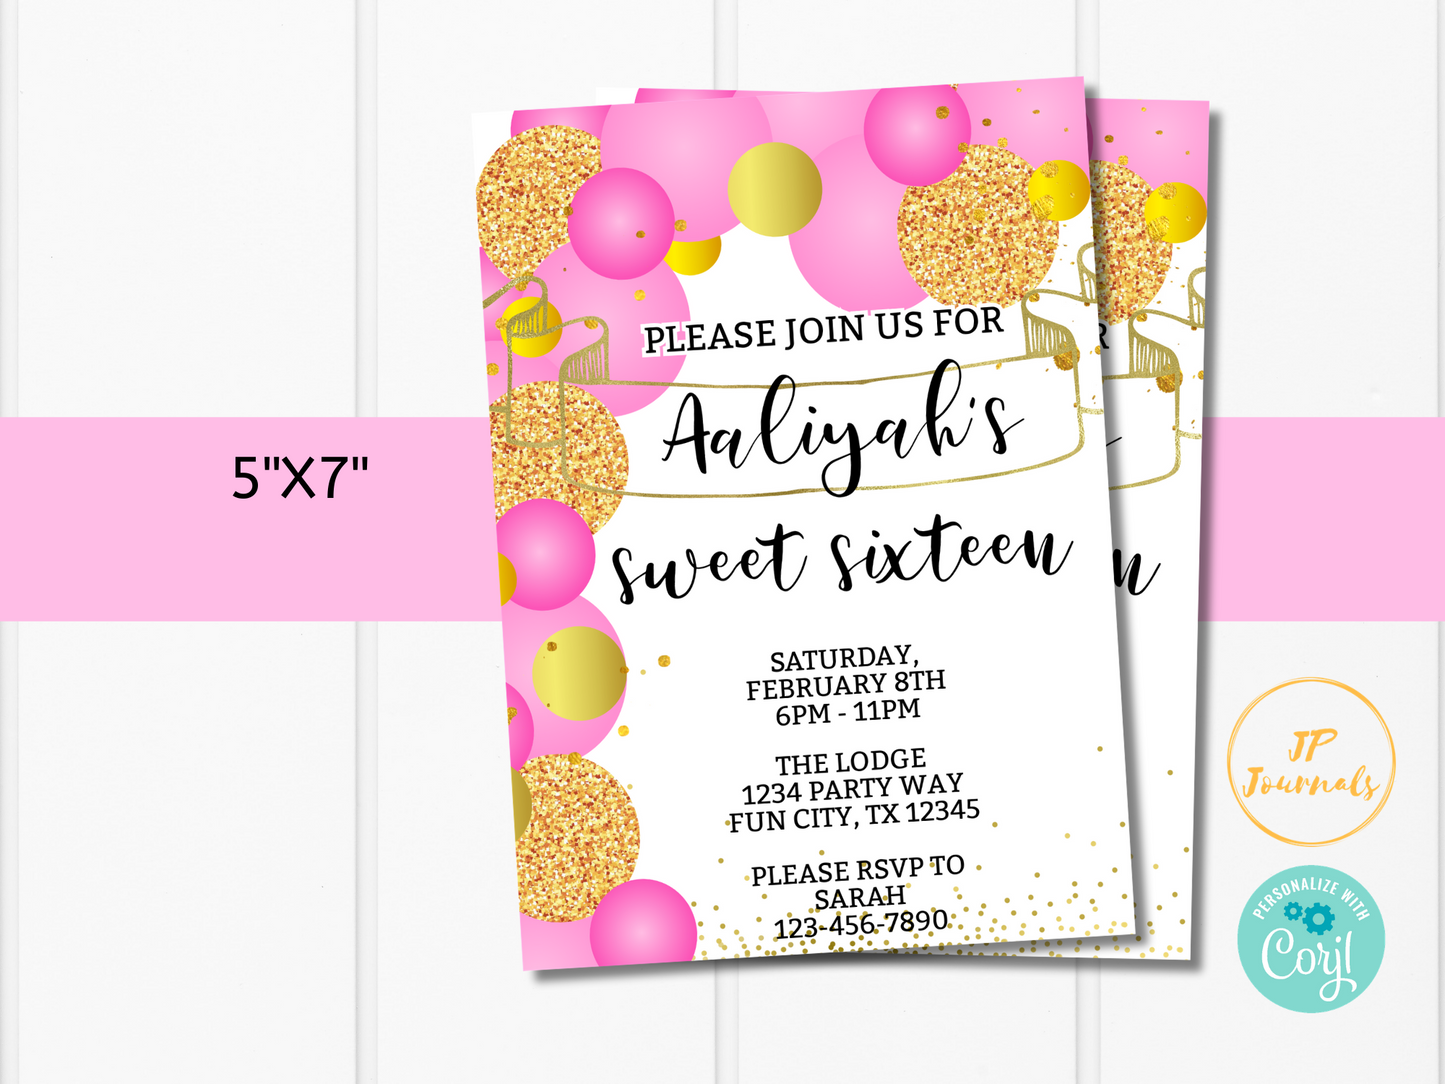 Printable Girl Birthday Party Invitation Template - Edit Online Print at Home - Pink Gold Sweet Sixteen - Balloons Arch